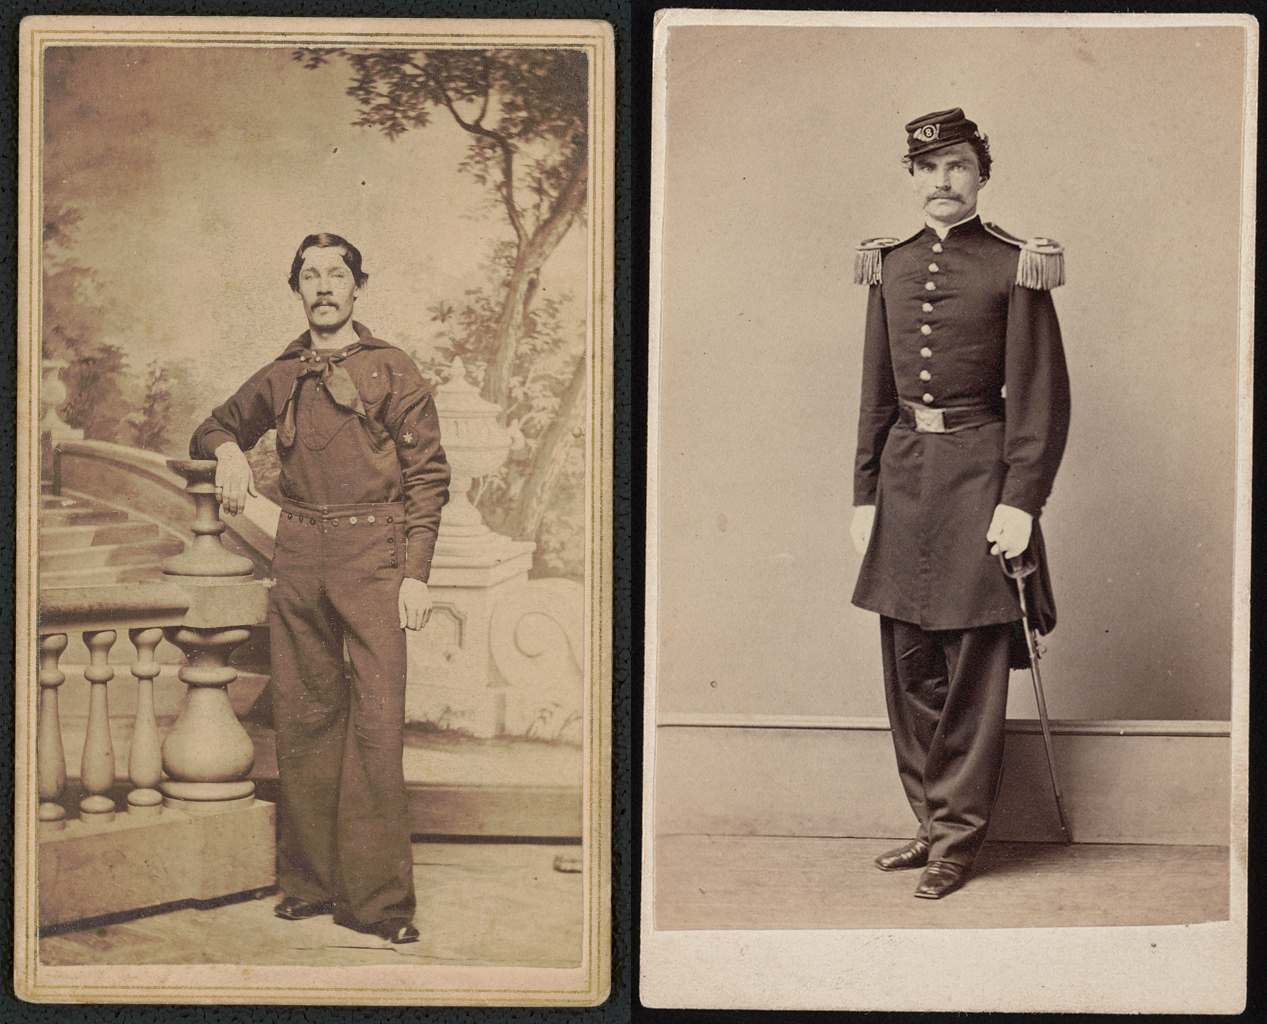 Left: Moore Bro's. Photographic Gallery, Unidentified U.S. sailor in uniform in front of painted backdrop showing walkway and trees, c. 1861–65, albumen print on card (<a href="https://www.loc.gov/item/2020633506/">Library of Congress</a>); right: Israel &amp; Co., First Lieutenant Patrick Boyce of Co. F, 8th Regular Army Infantry Regiment in uniform with sword, c. 1861–65 (<a href="https://www.loc.gov/item/2017659653/">Library of Congress</a>)